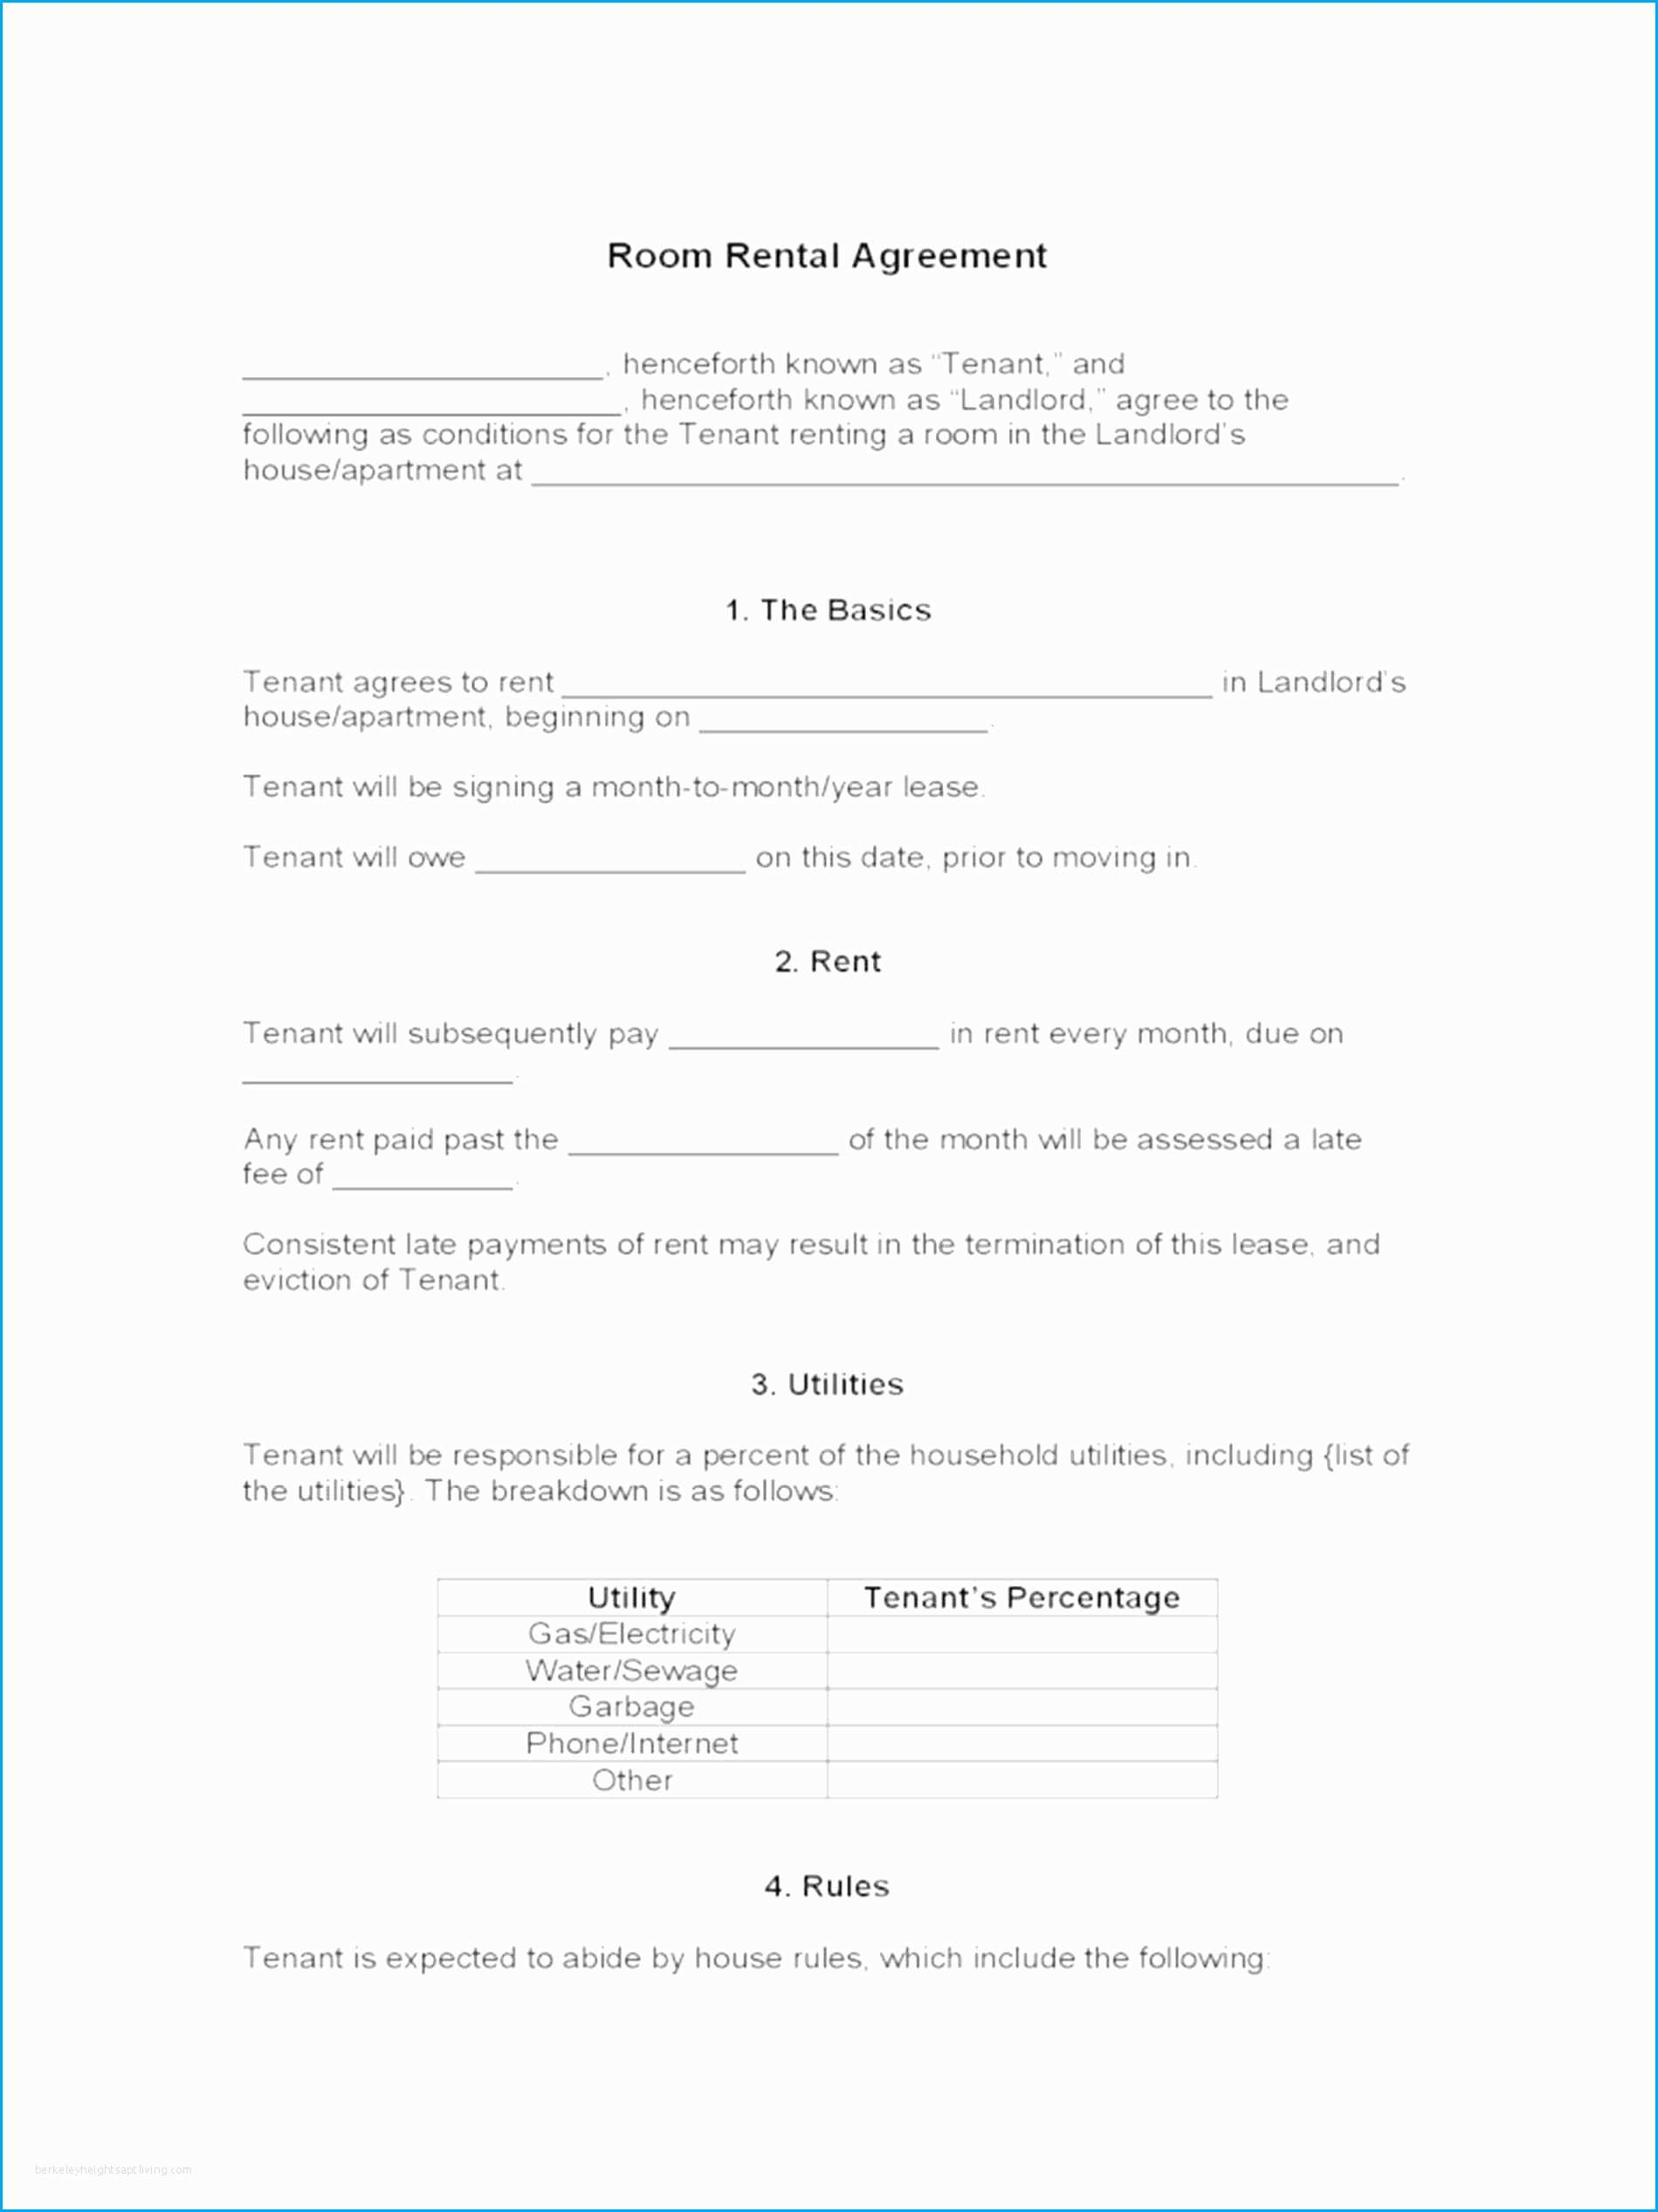 lease-abstract-spreadsheet-with-regard-to-54-good-of-lease-abstract-template-template-ideas-db